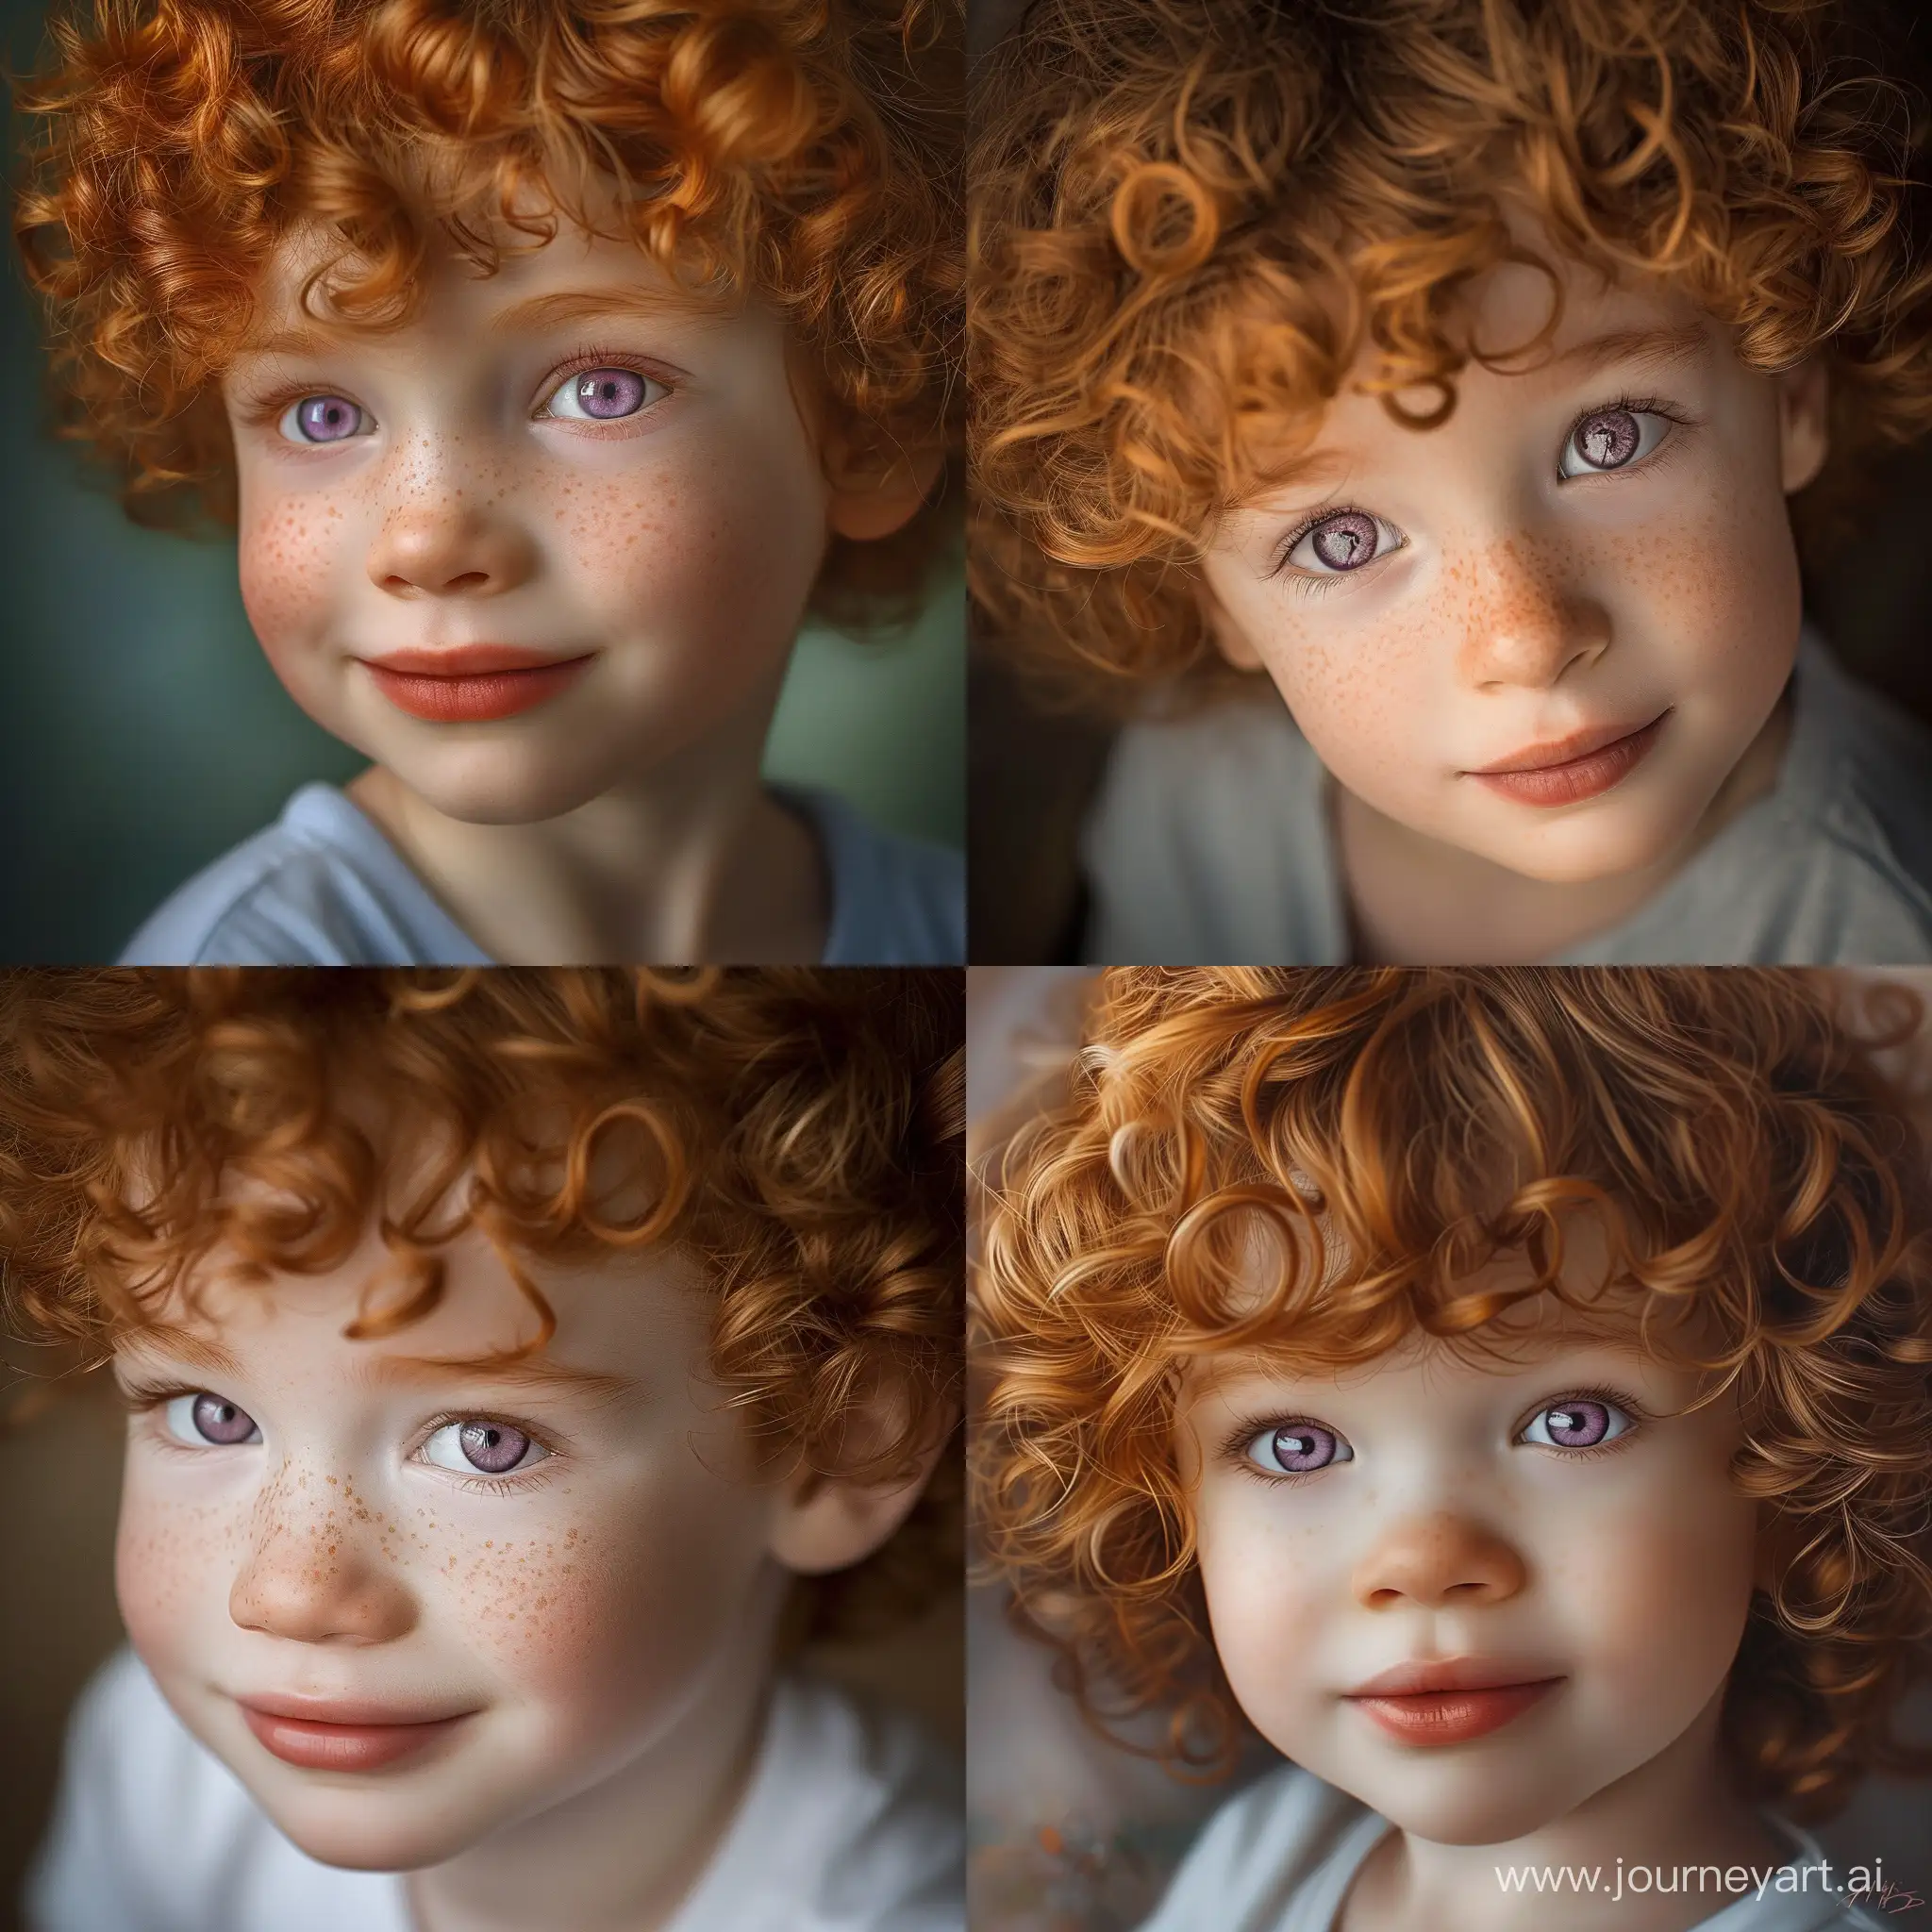 Adorable-5YearOld-Prince-with-Violet-Eyes-and-Curly-Russet-Hair